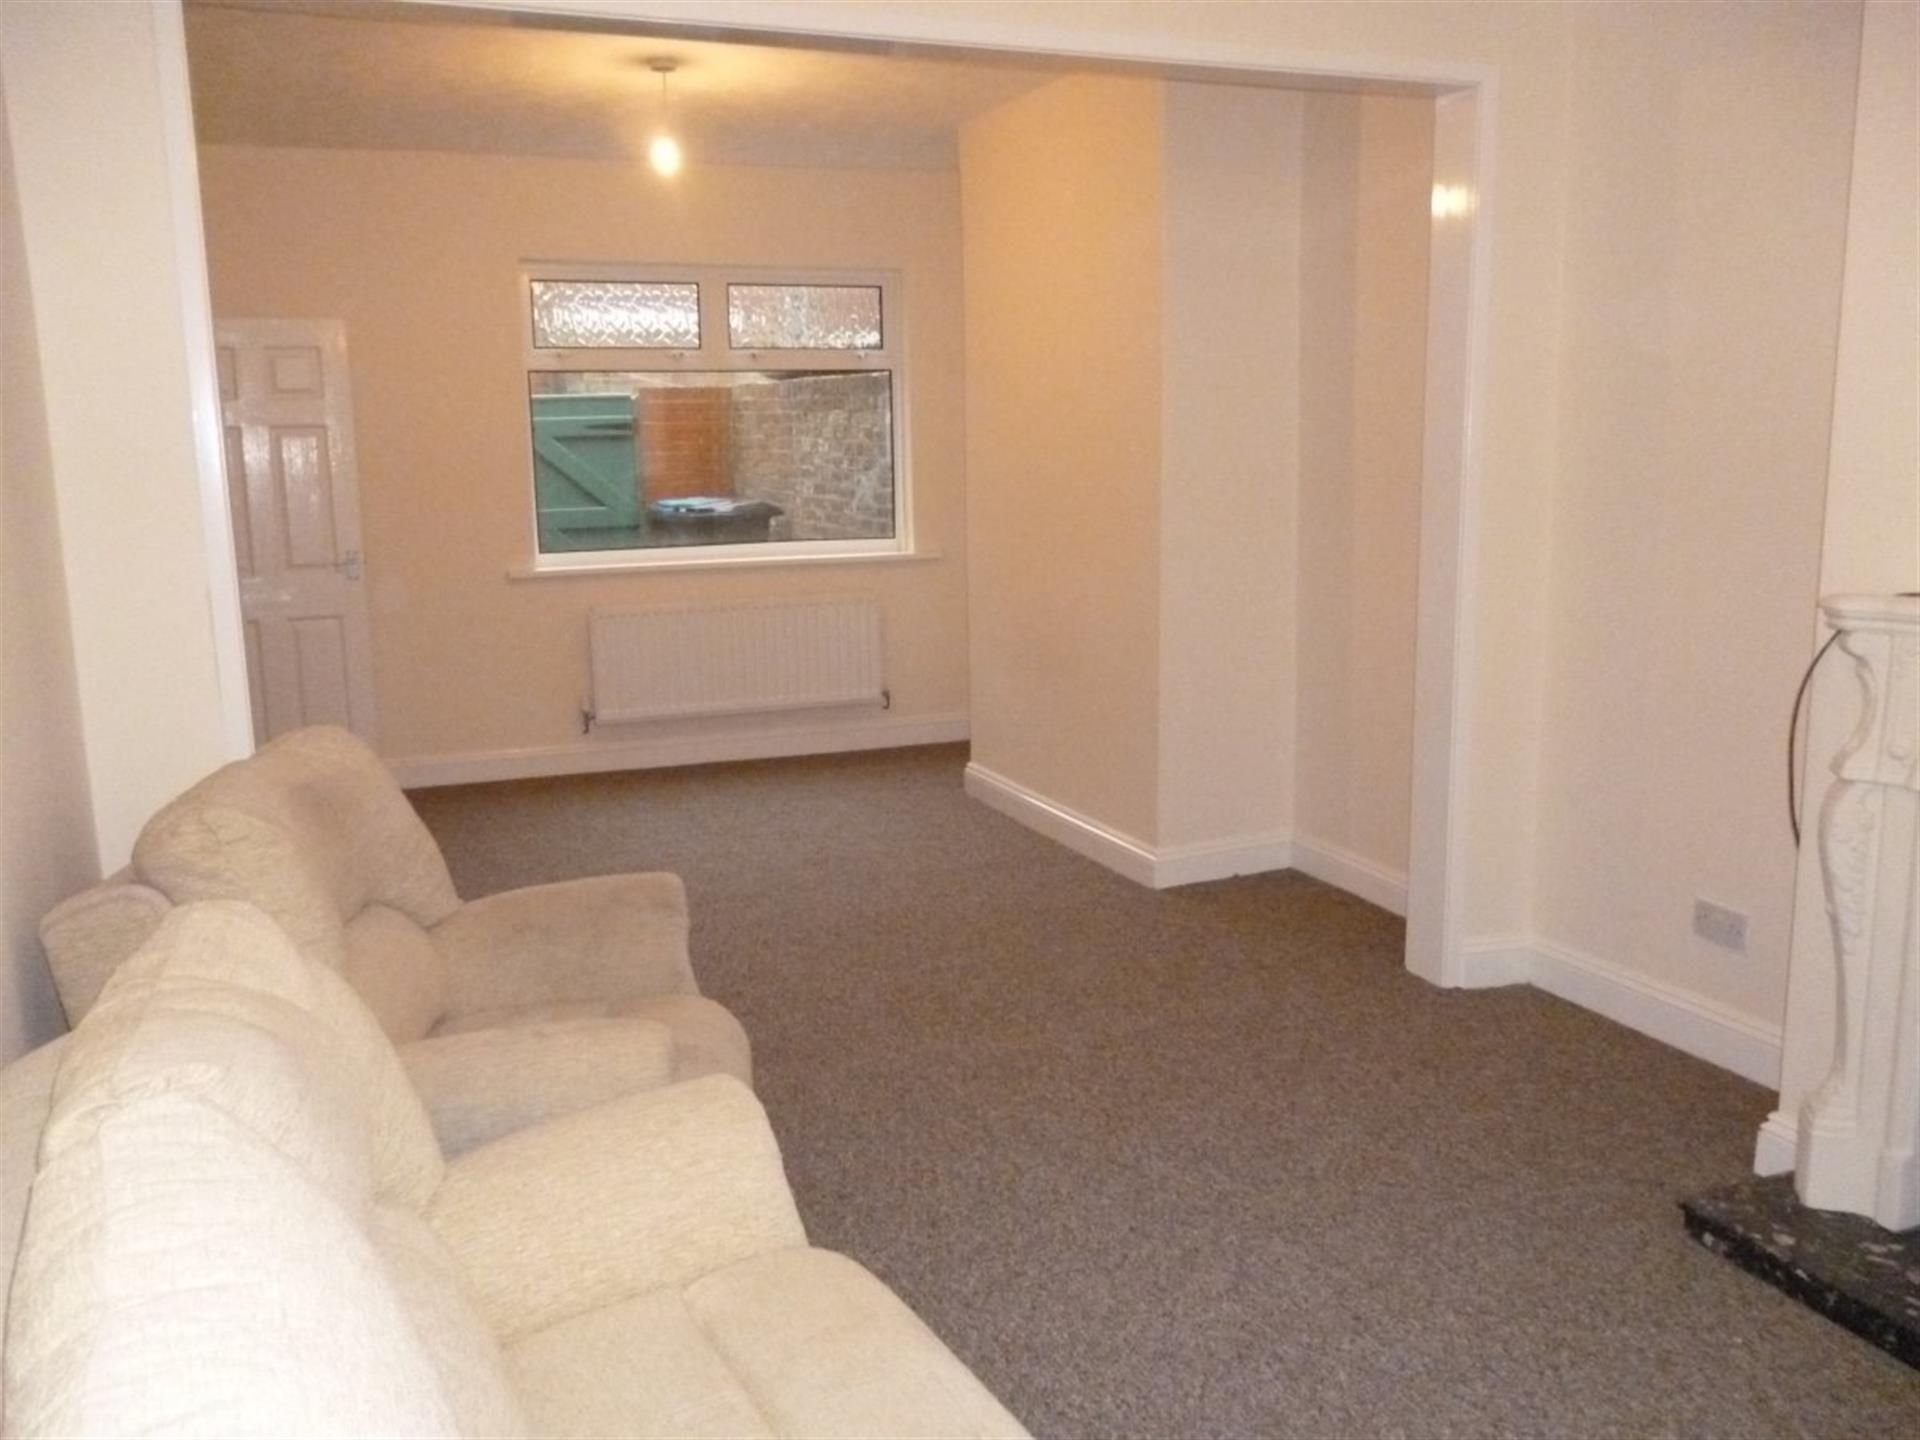 2 bedroom terraced house To Let in Bishop Auckland - photograph 4.